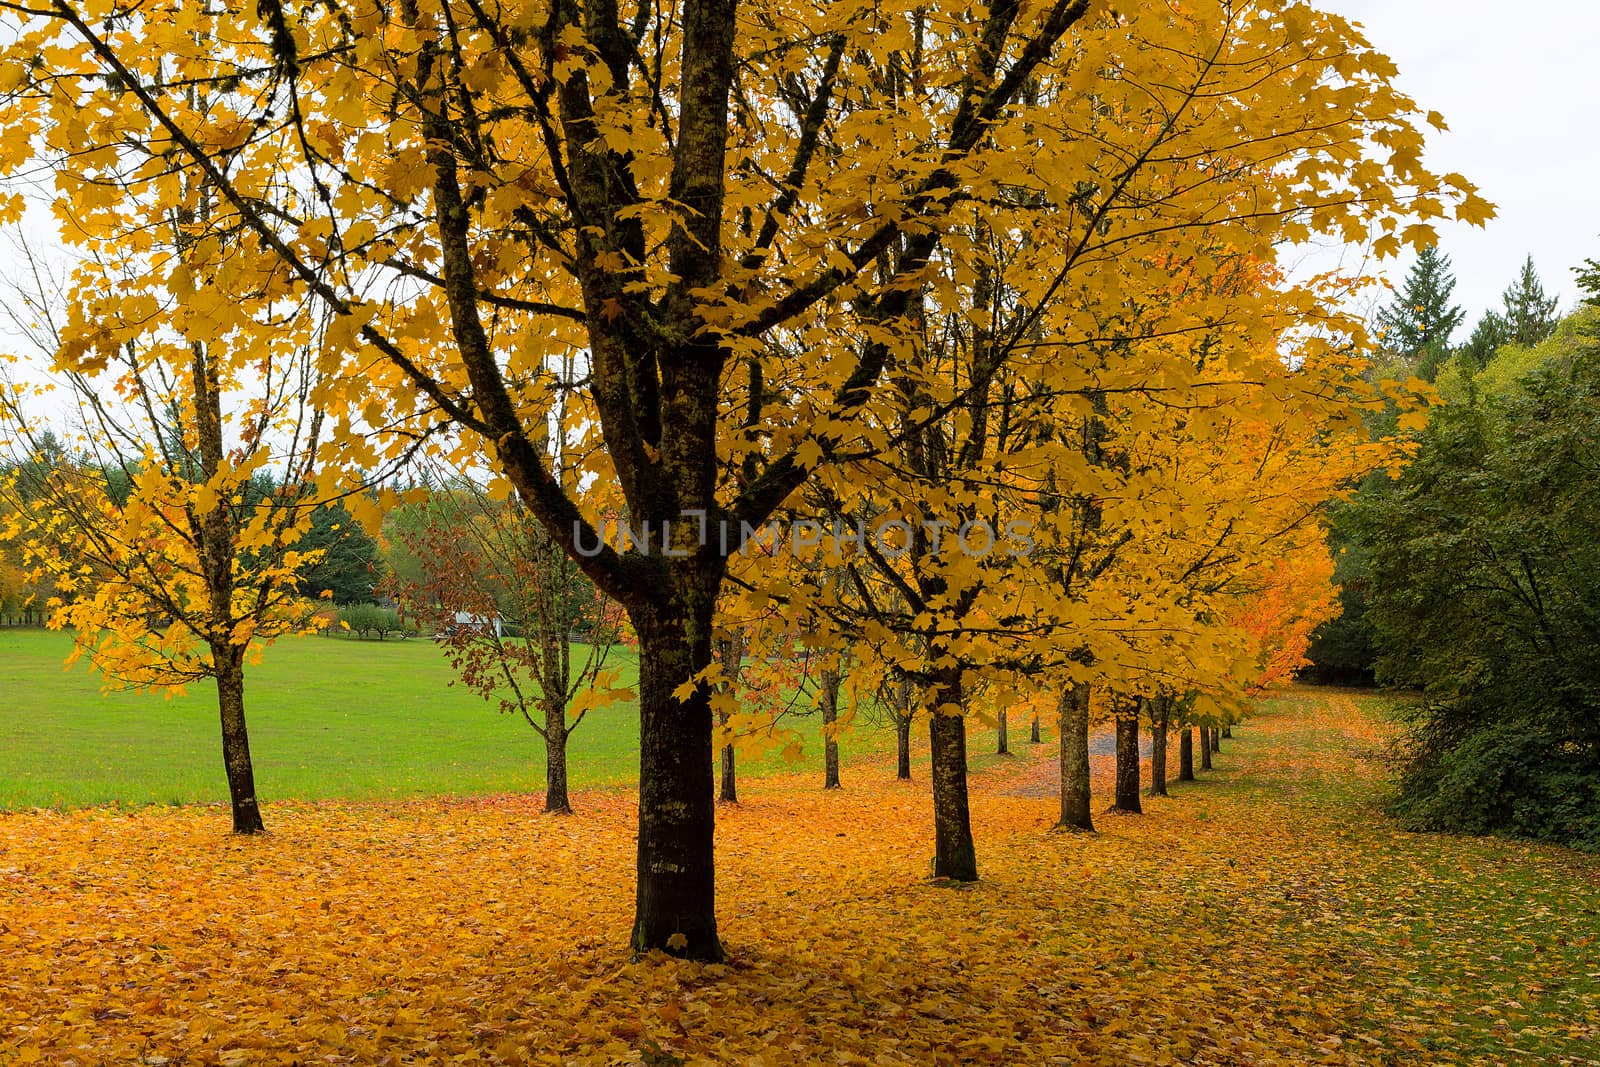 Maple trees in peak golden fall colors on tree lined waling path in the park